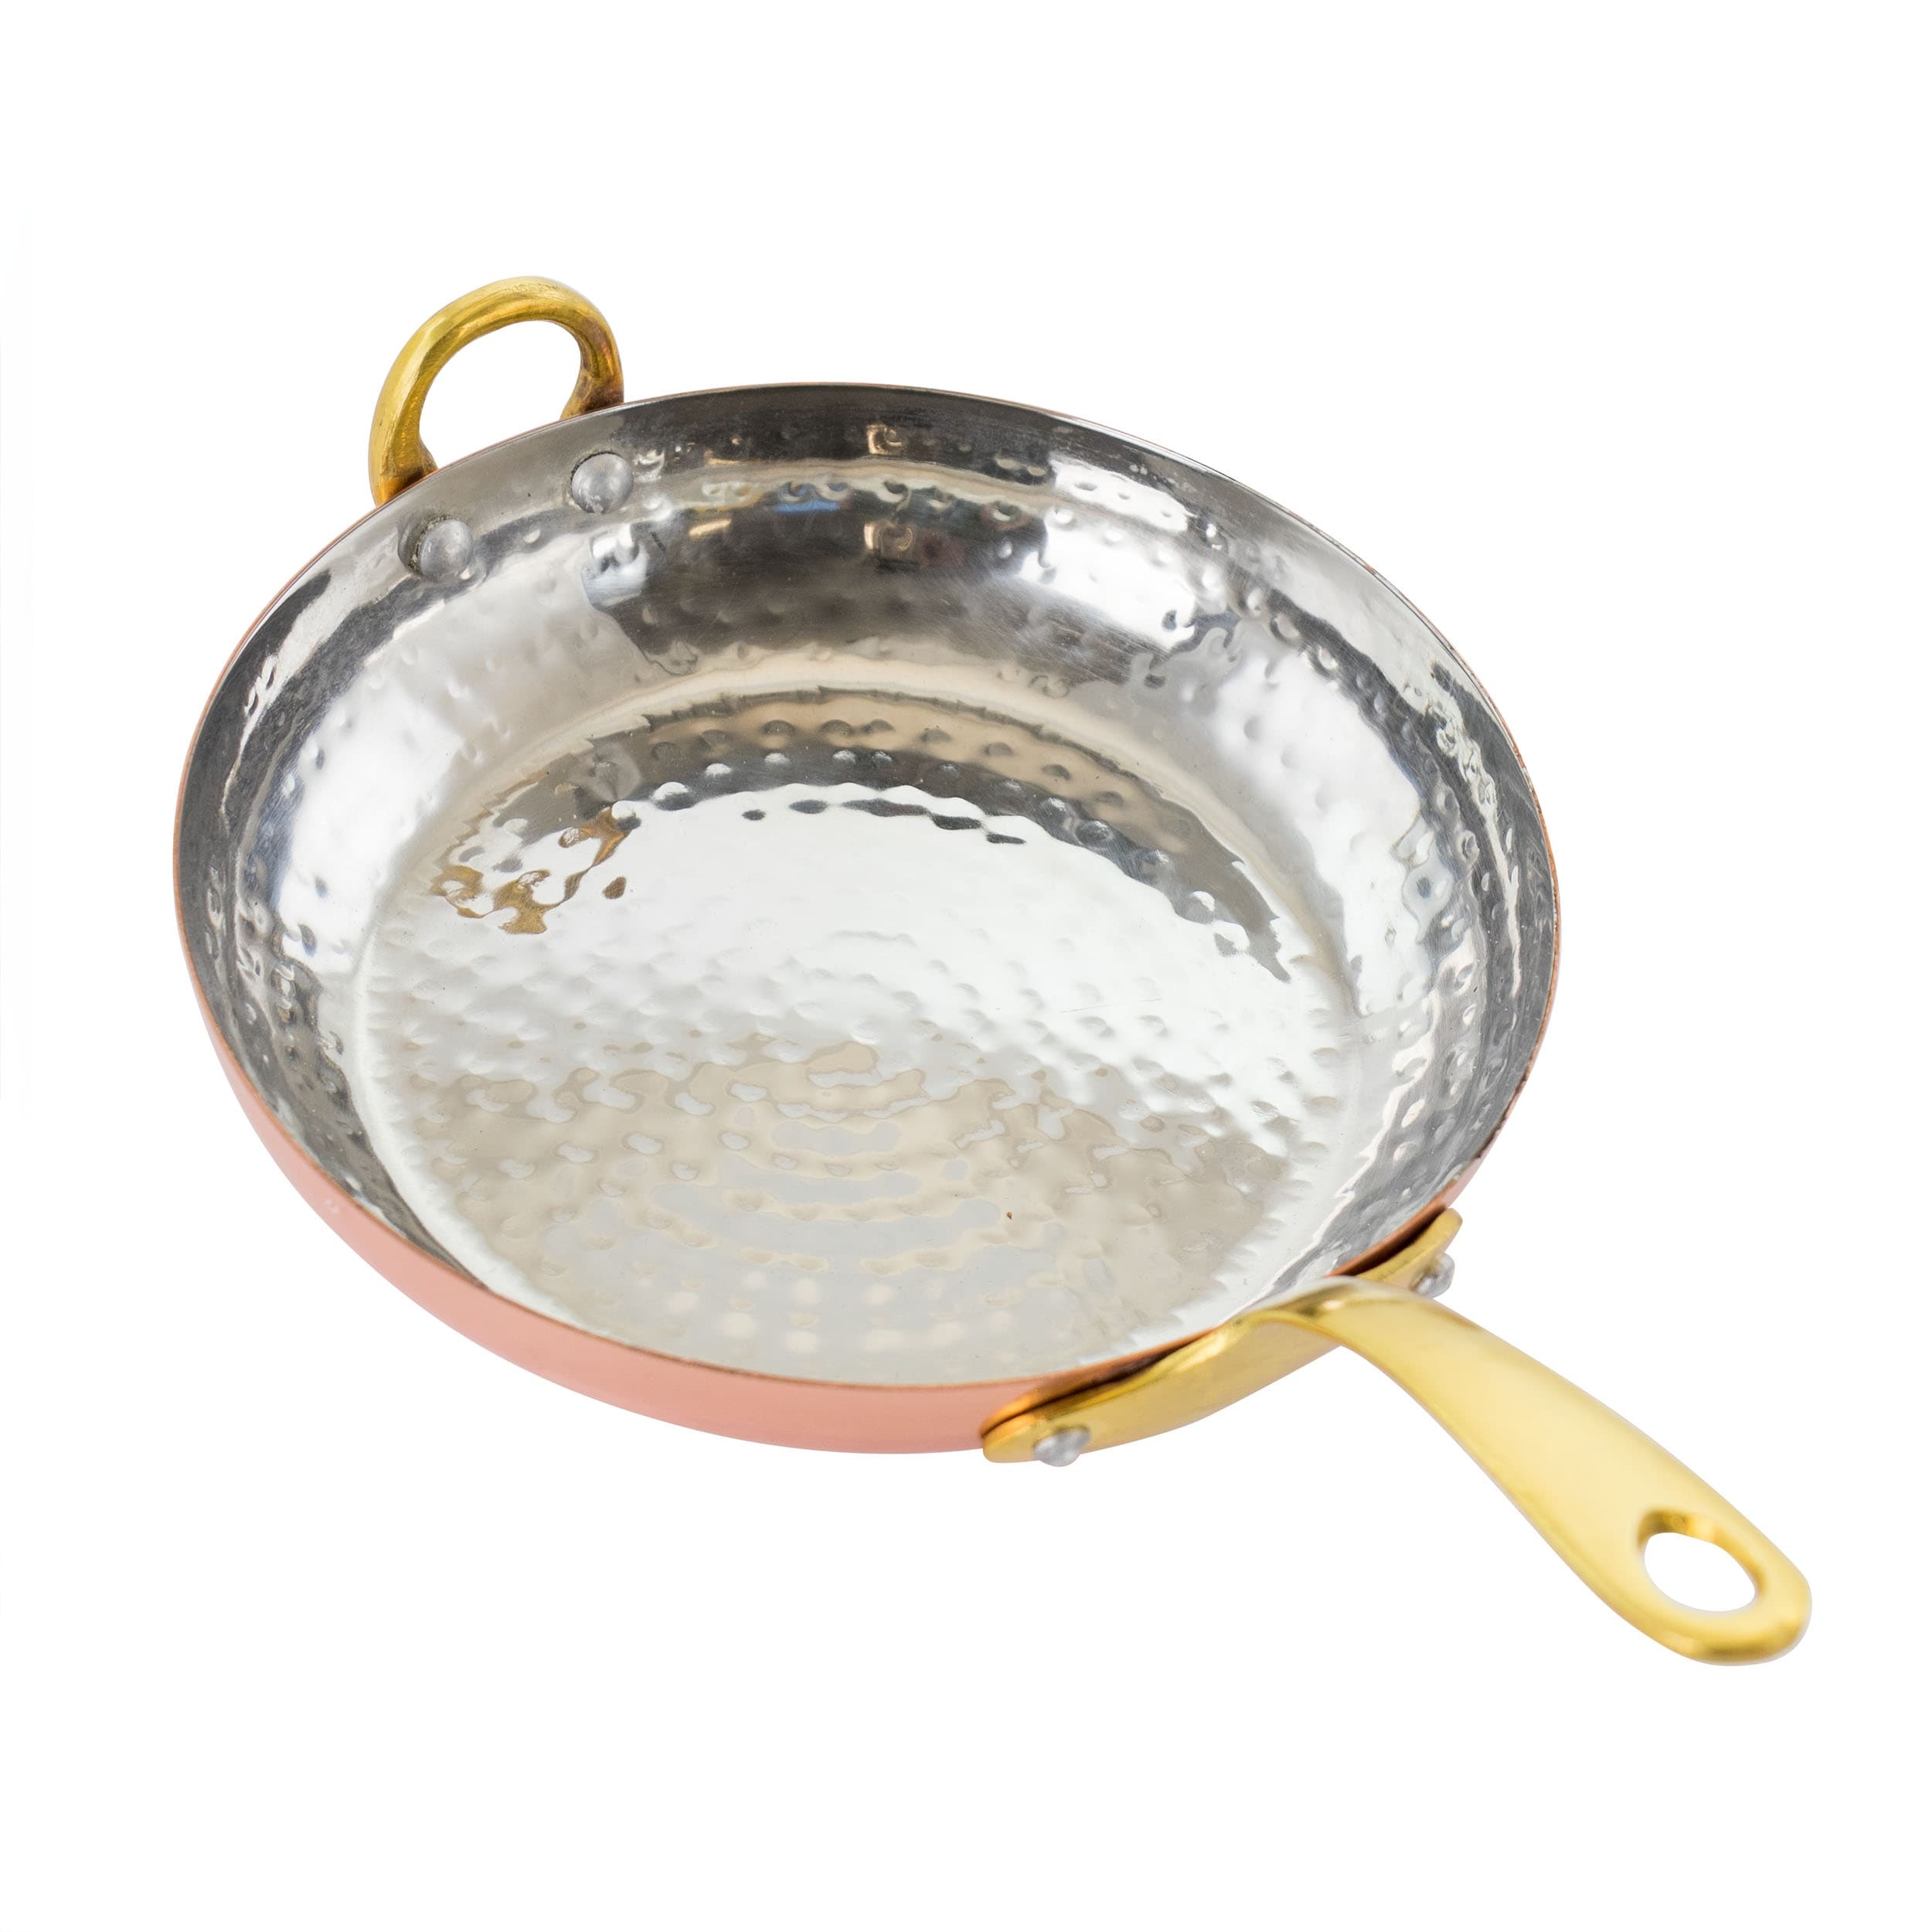 6 inch frying pan stainless